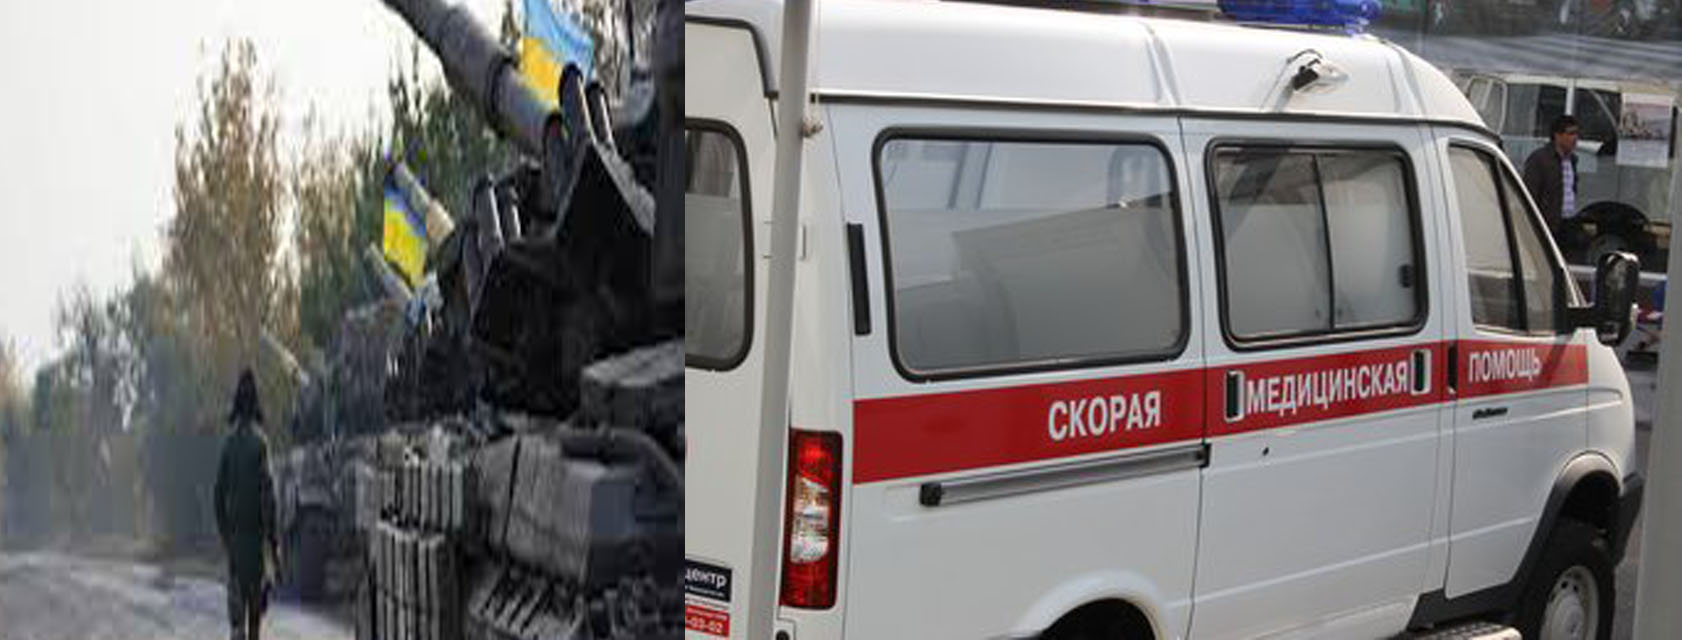 Ukraine started shelling central streets of Donetsk, doctors and civilian under the shelling